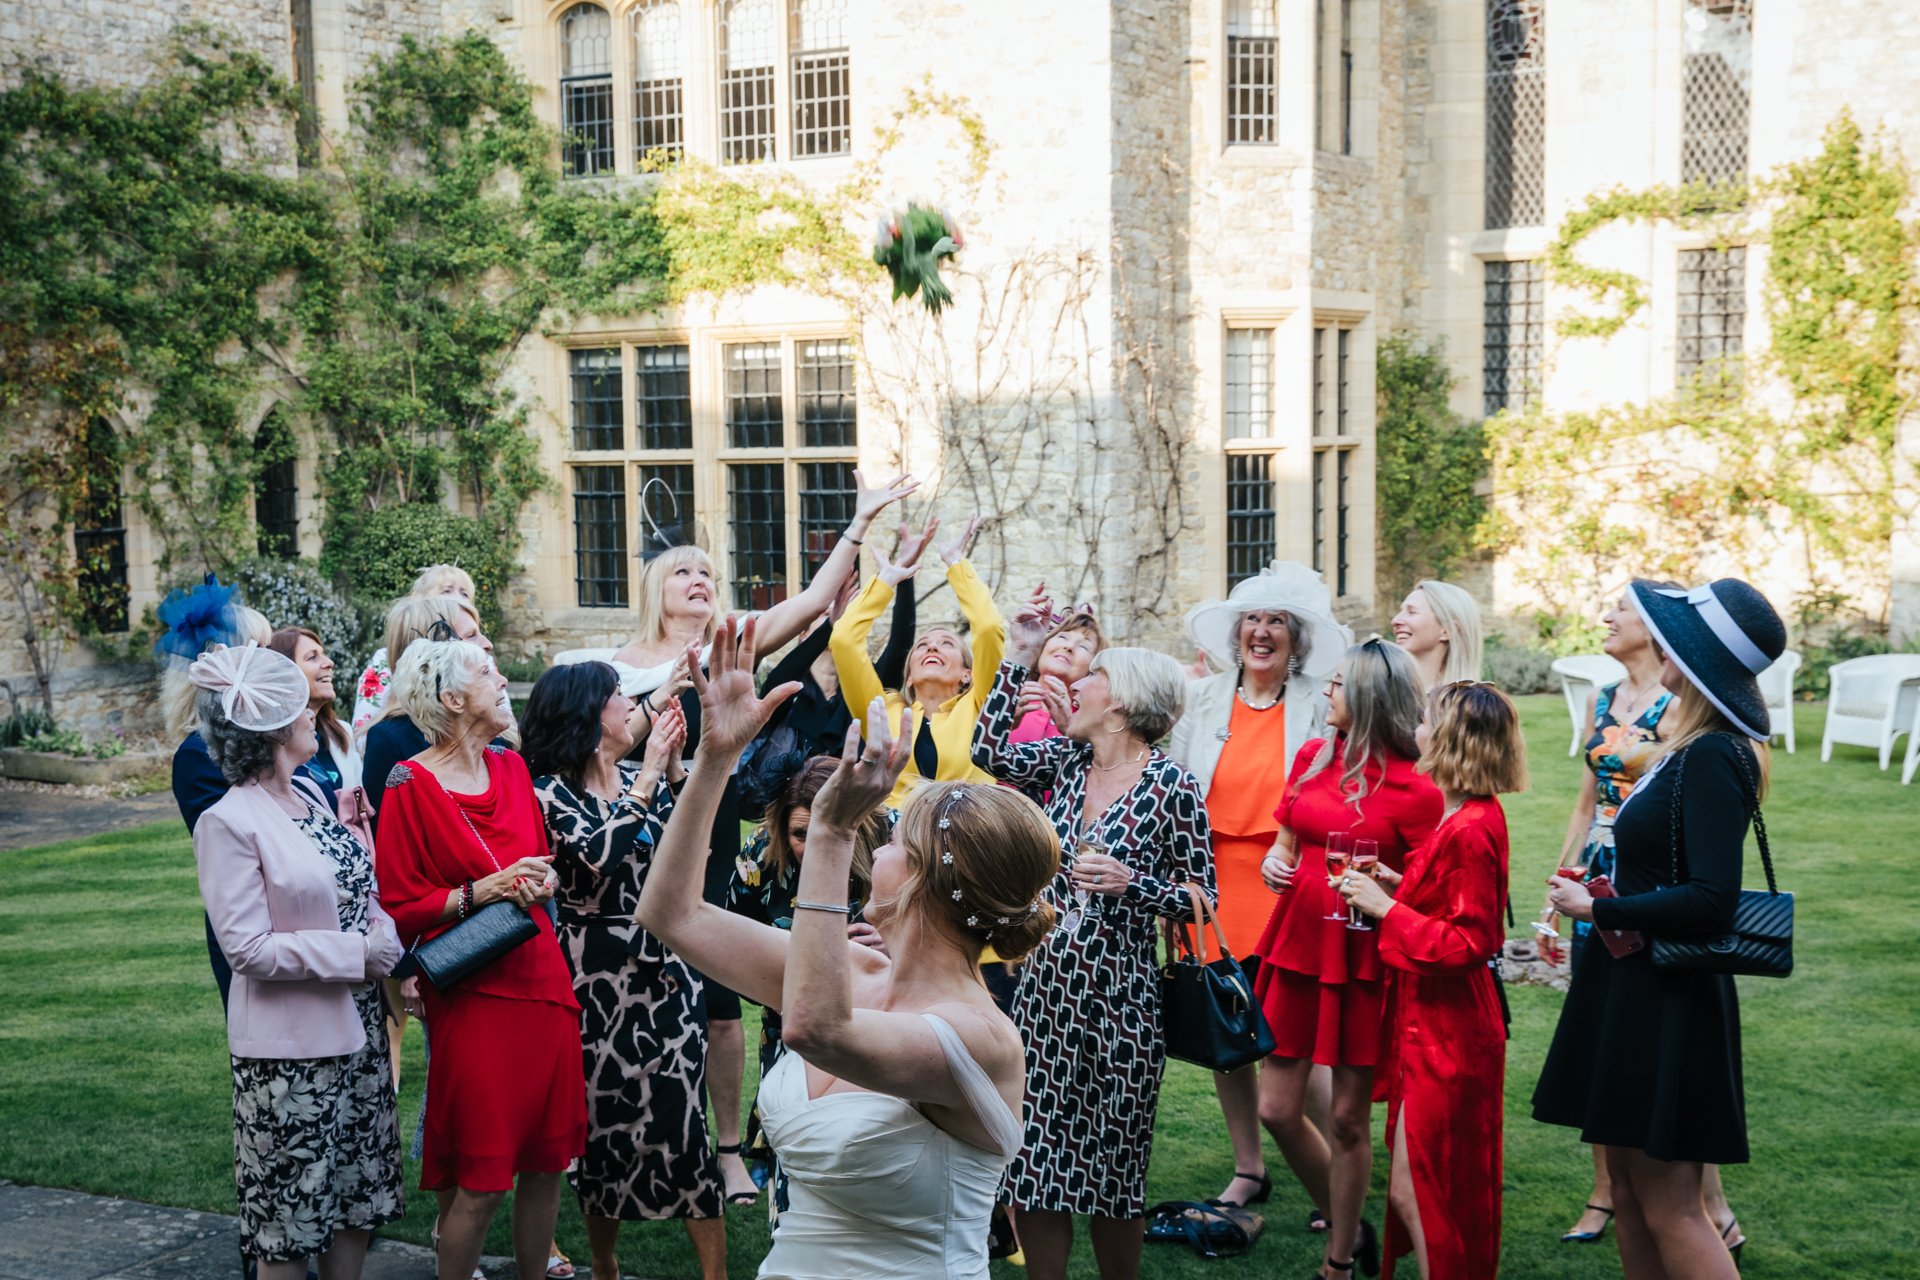 Bride throws her bouquet to her friends in the Courtyard at Allington Castle